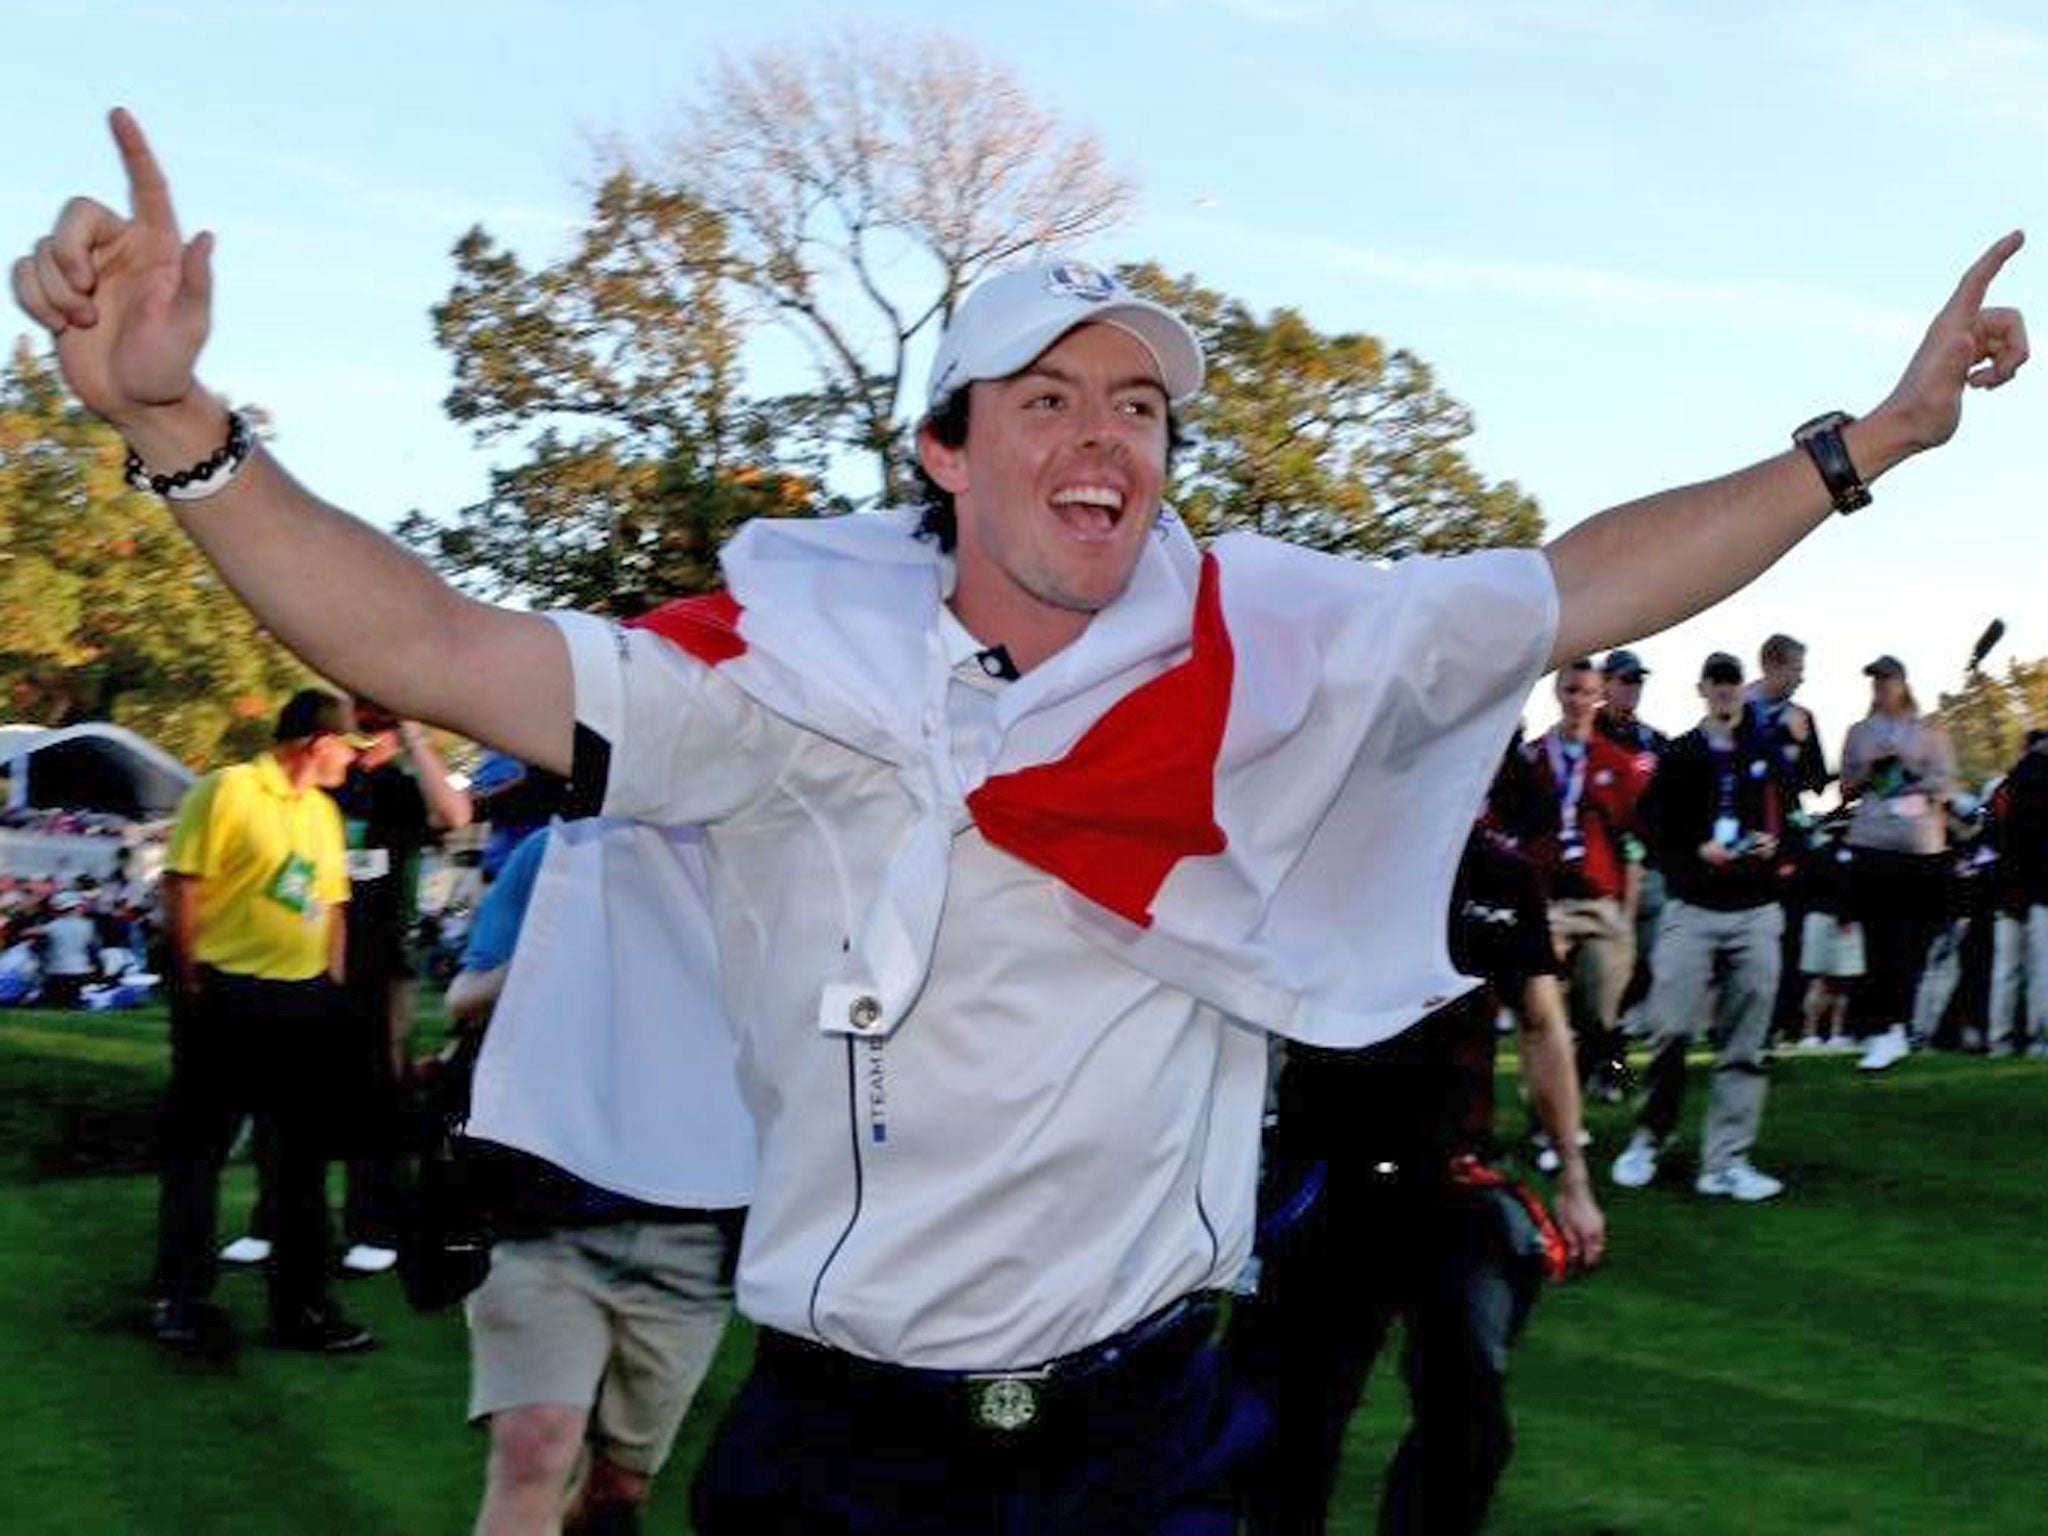 McIlroy’s image was enhanced by Europe’s Ryder Cup victory last year